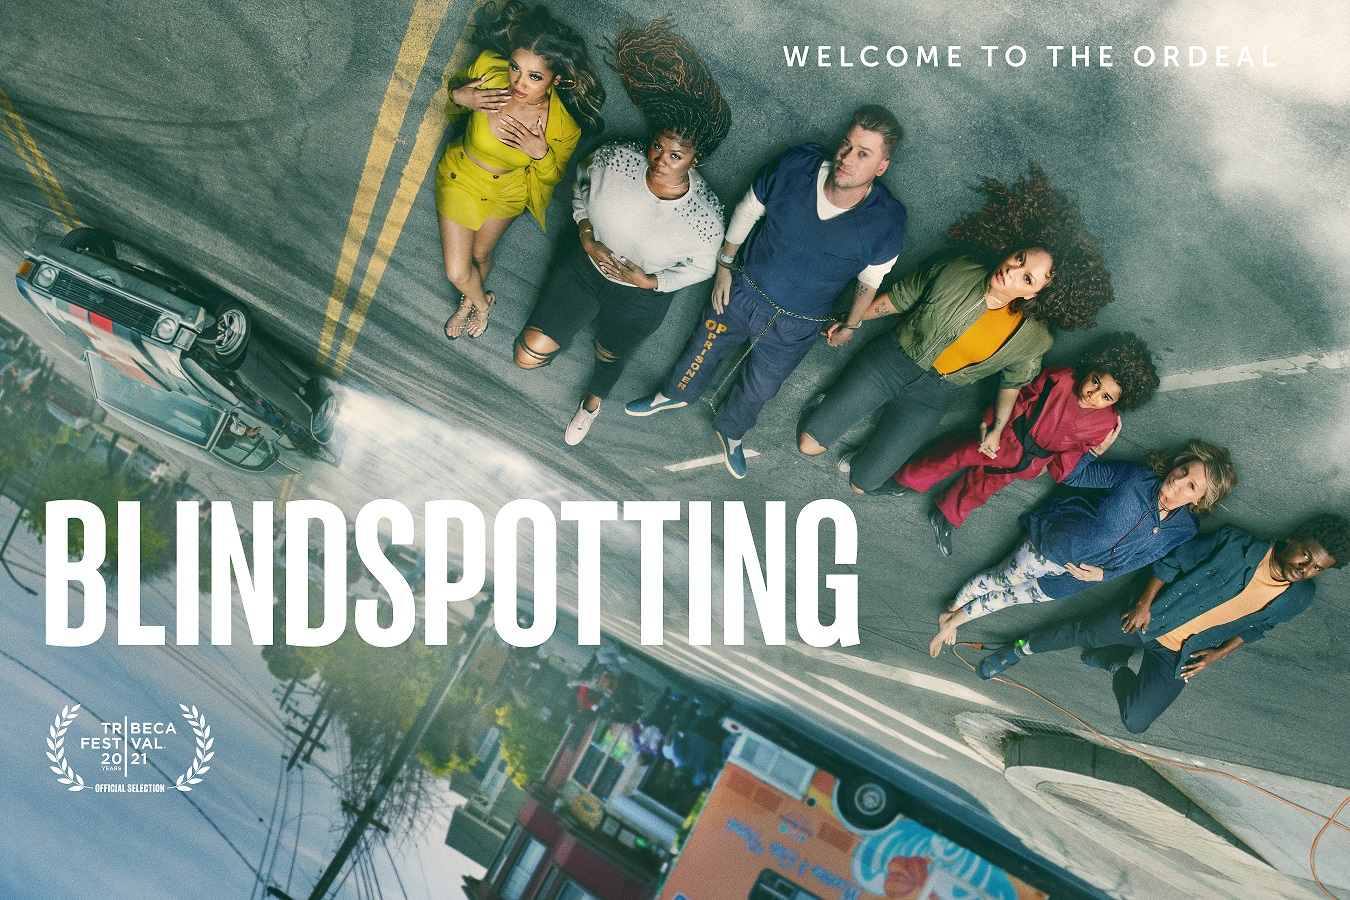 The Oakland Community And Culture Comes To MENA, As Blindspotting Season 1 Premieres Exclusively On STARZPLAY